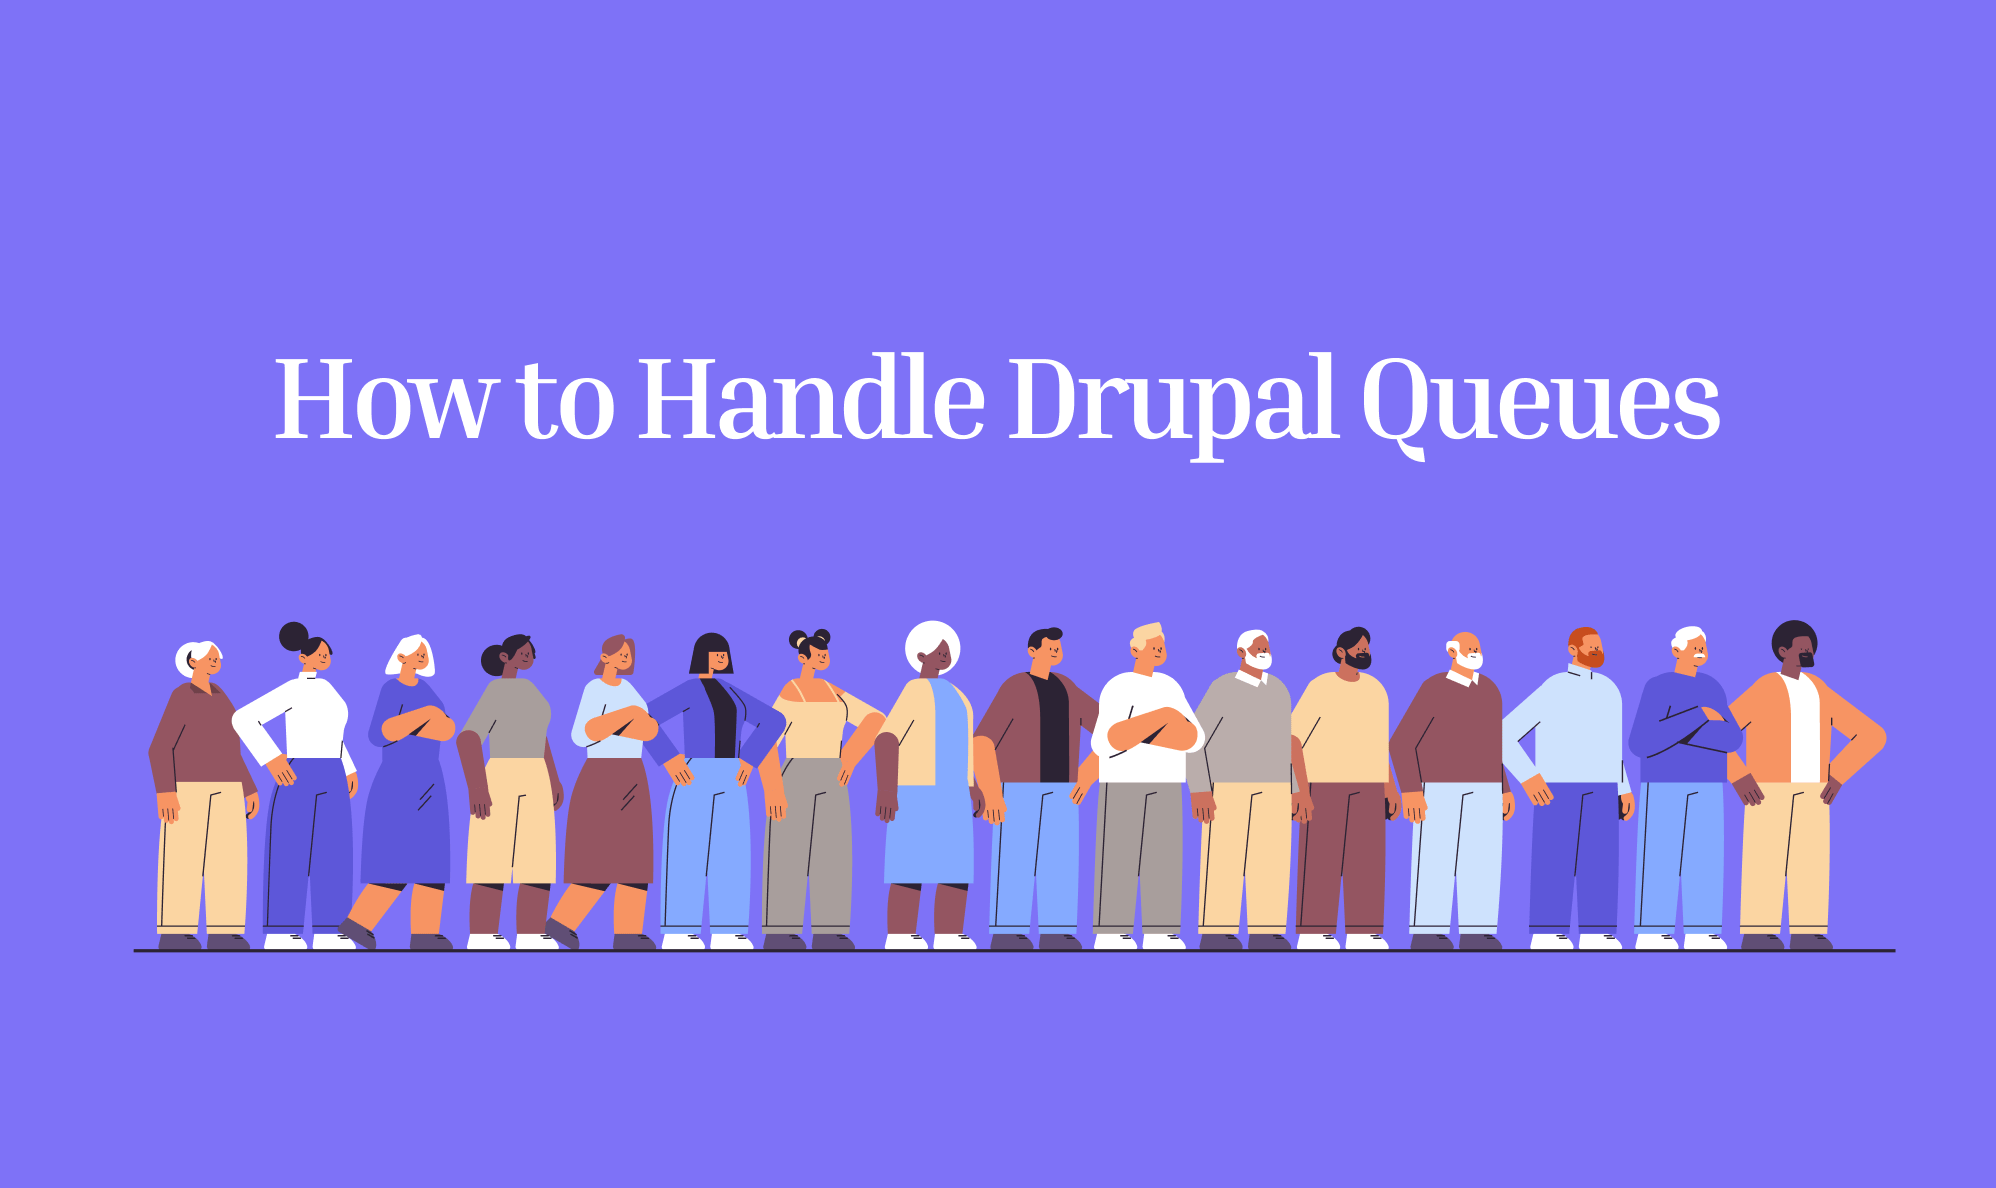 How to Handle Drupal Queues image